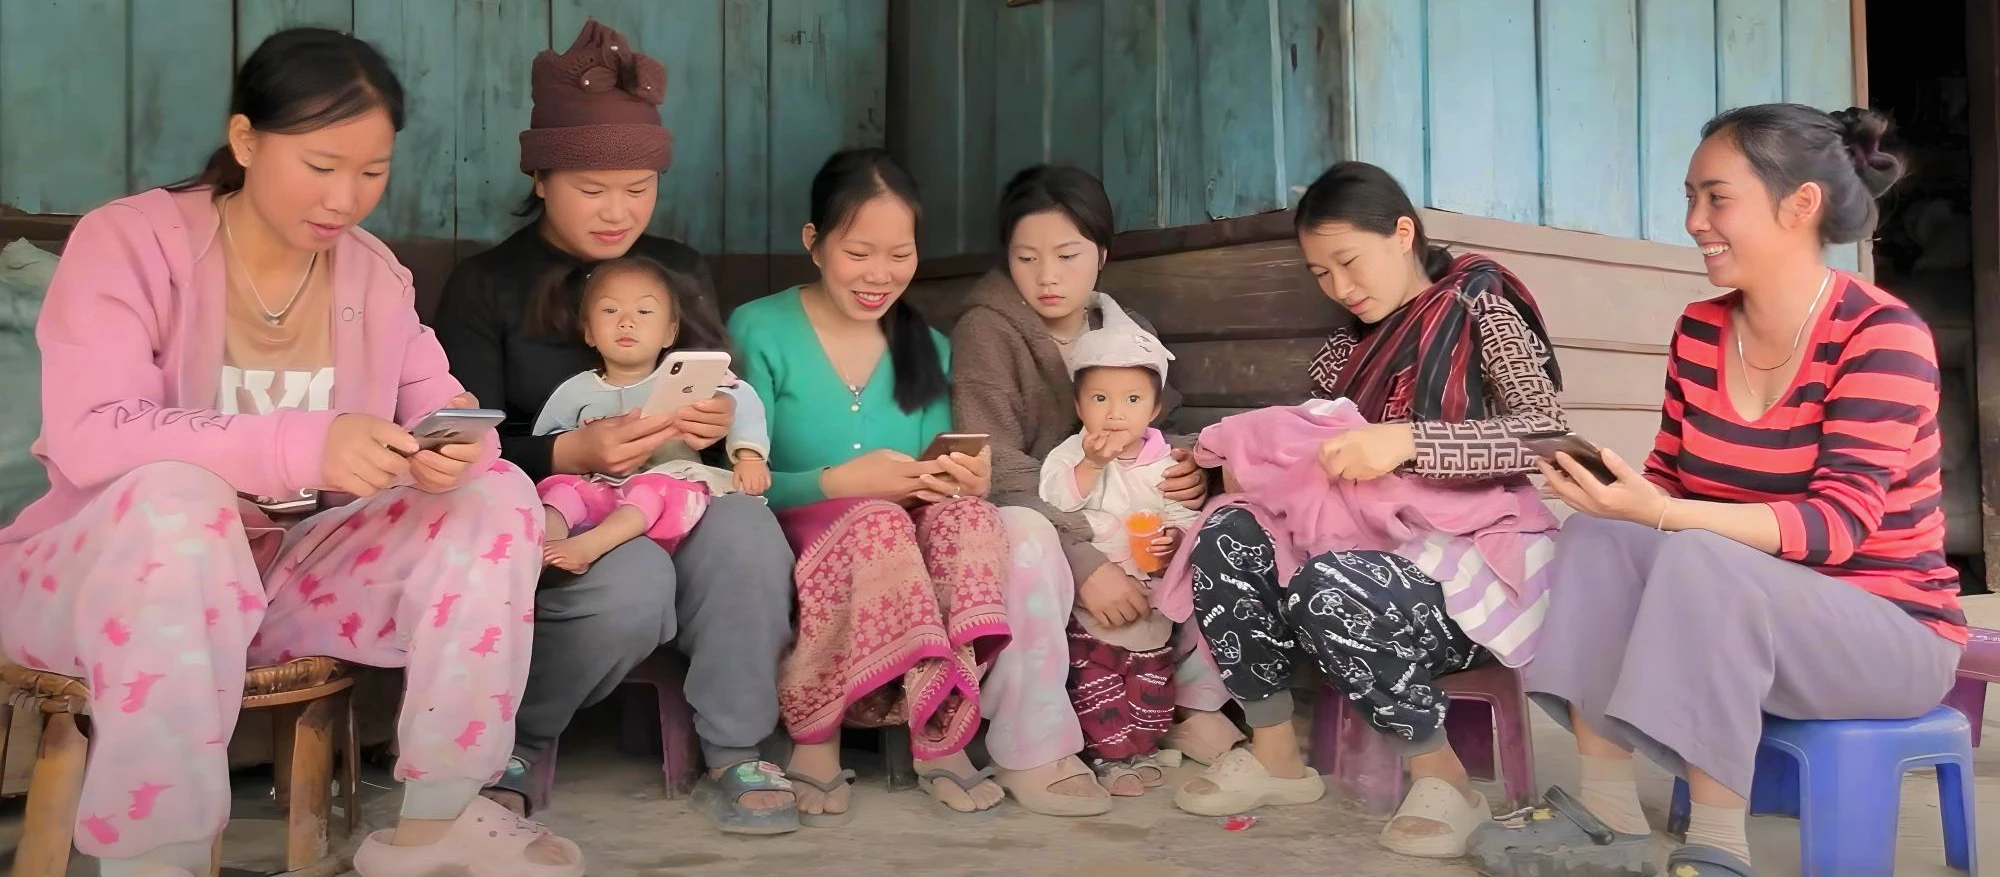 Village women in Lao PDR learn how to make videos about infant nutrition